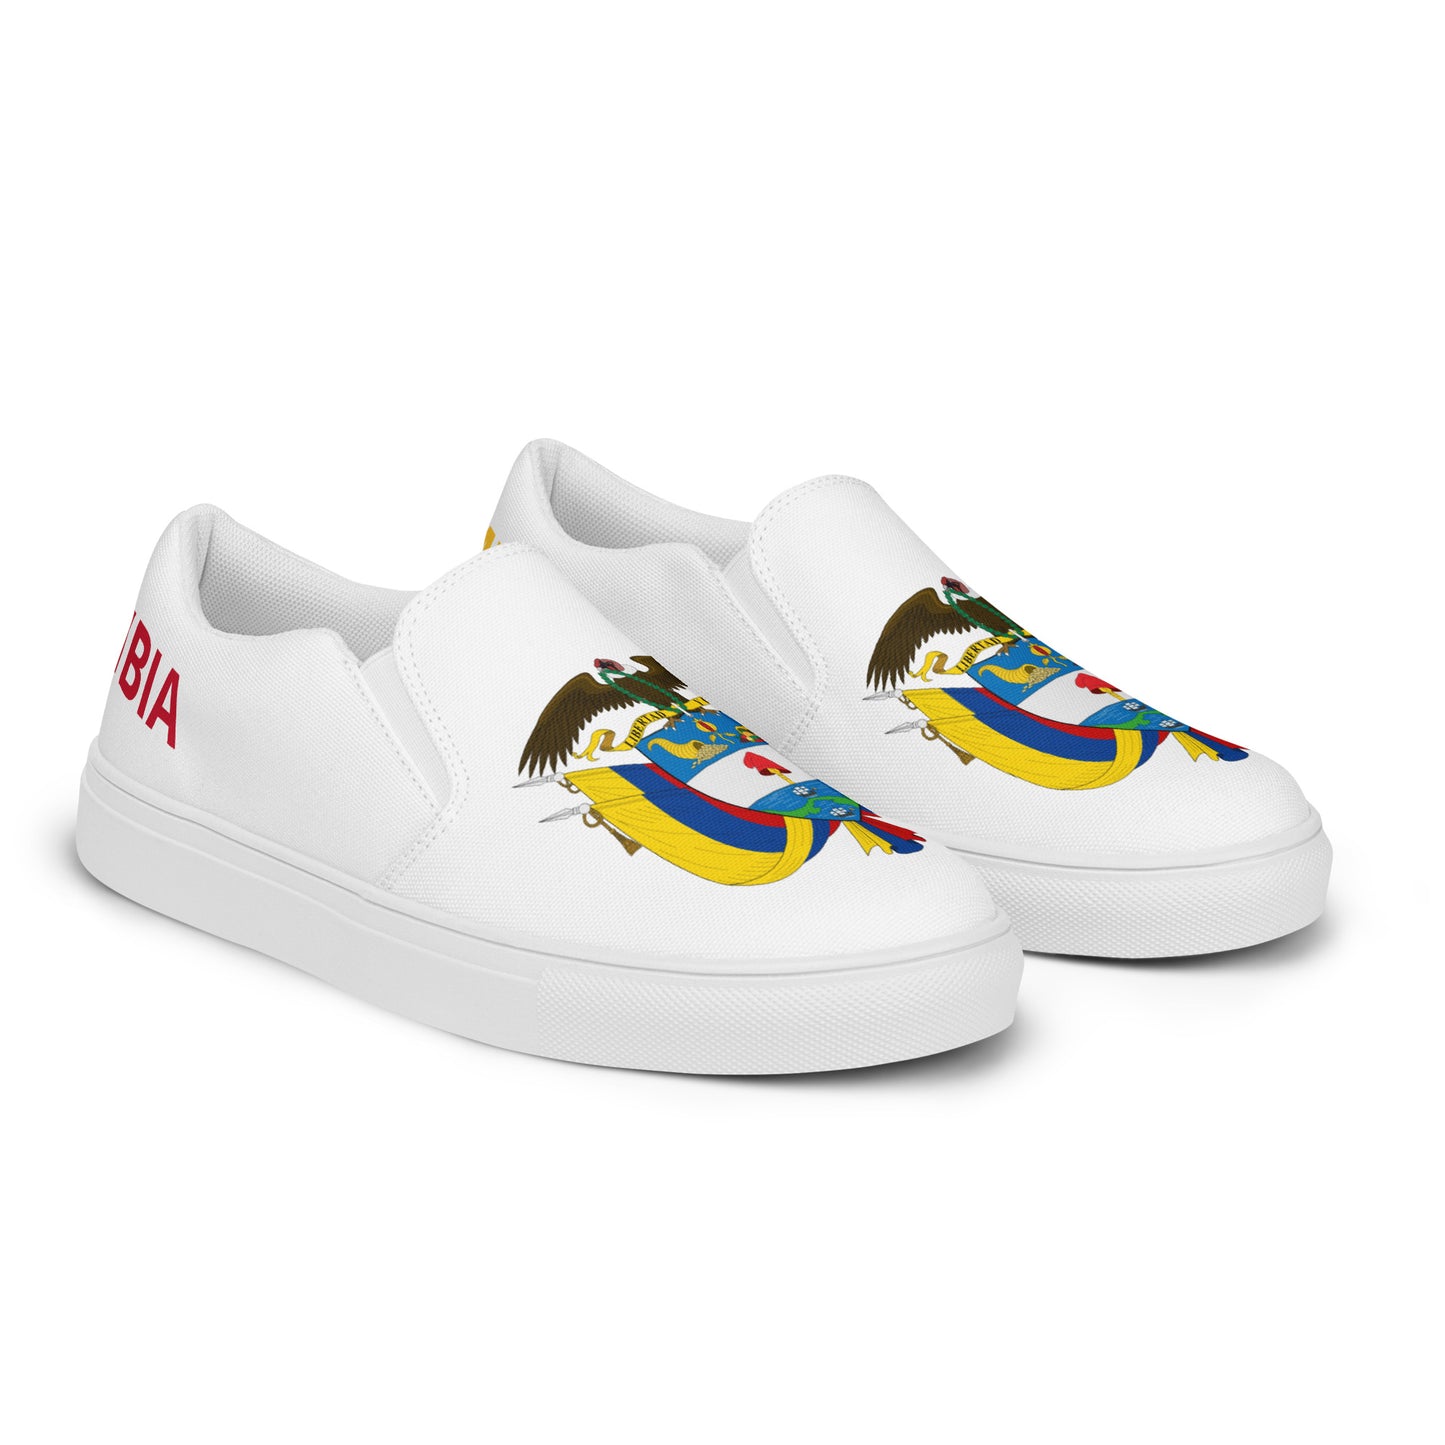 Colombia - Women - White - Slip-on shoes